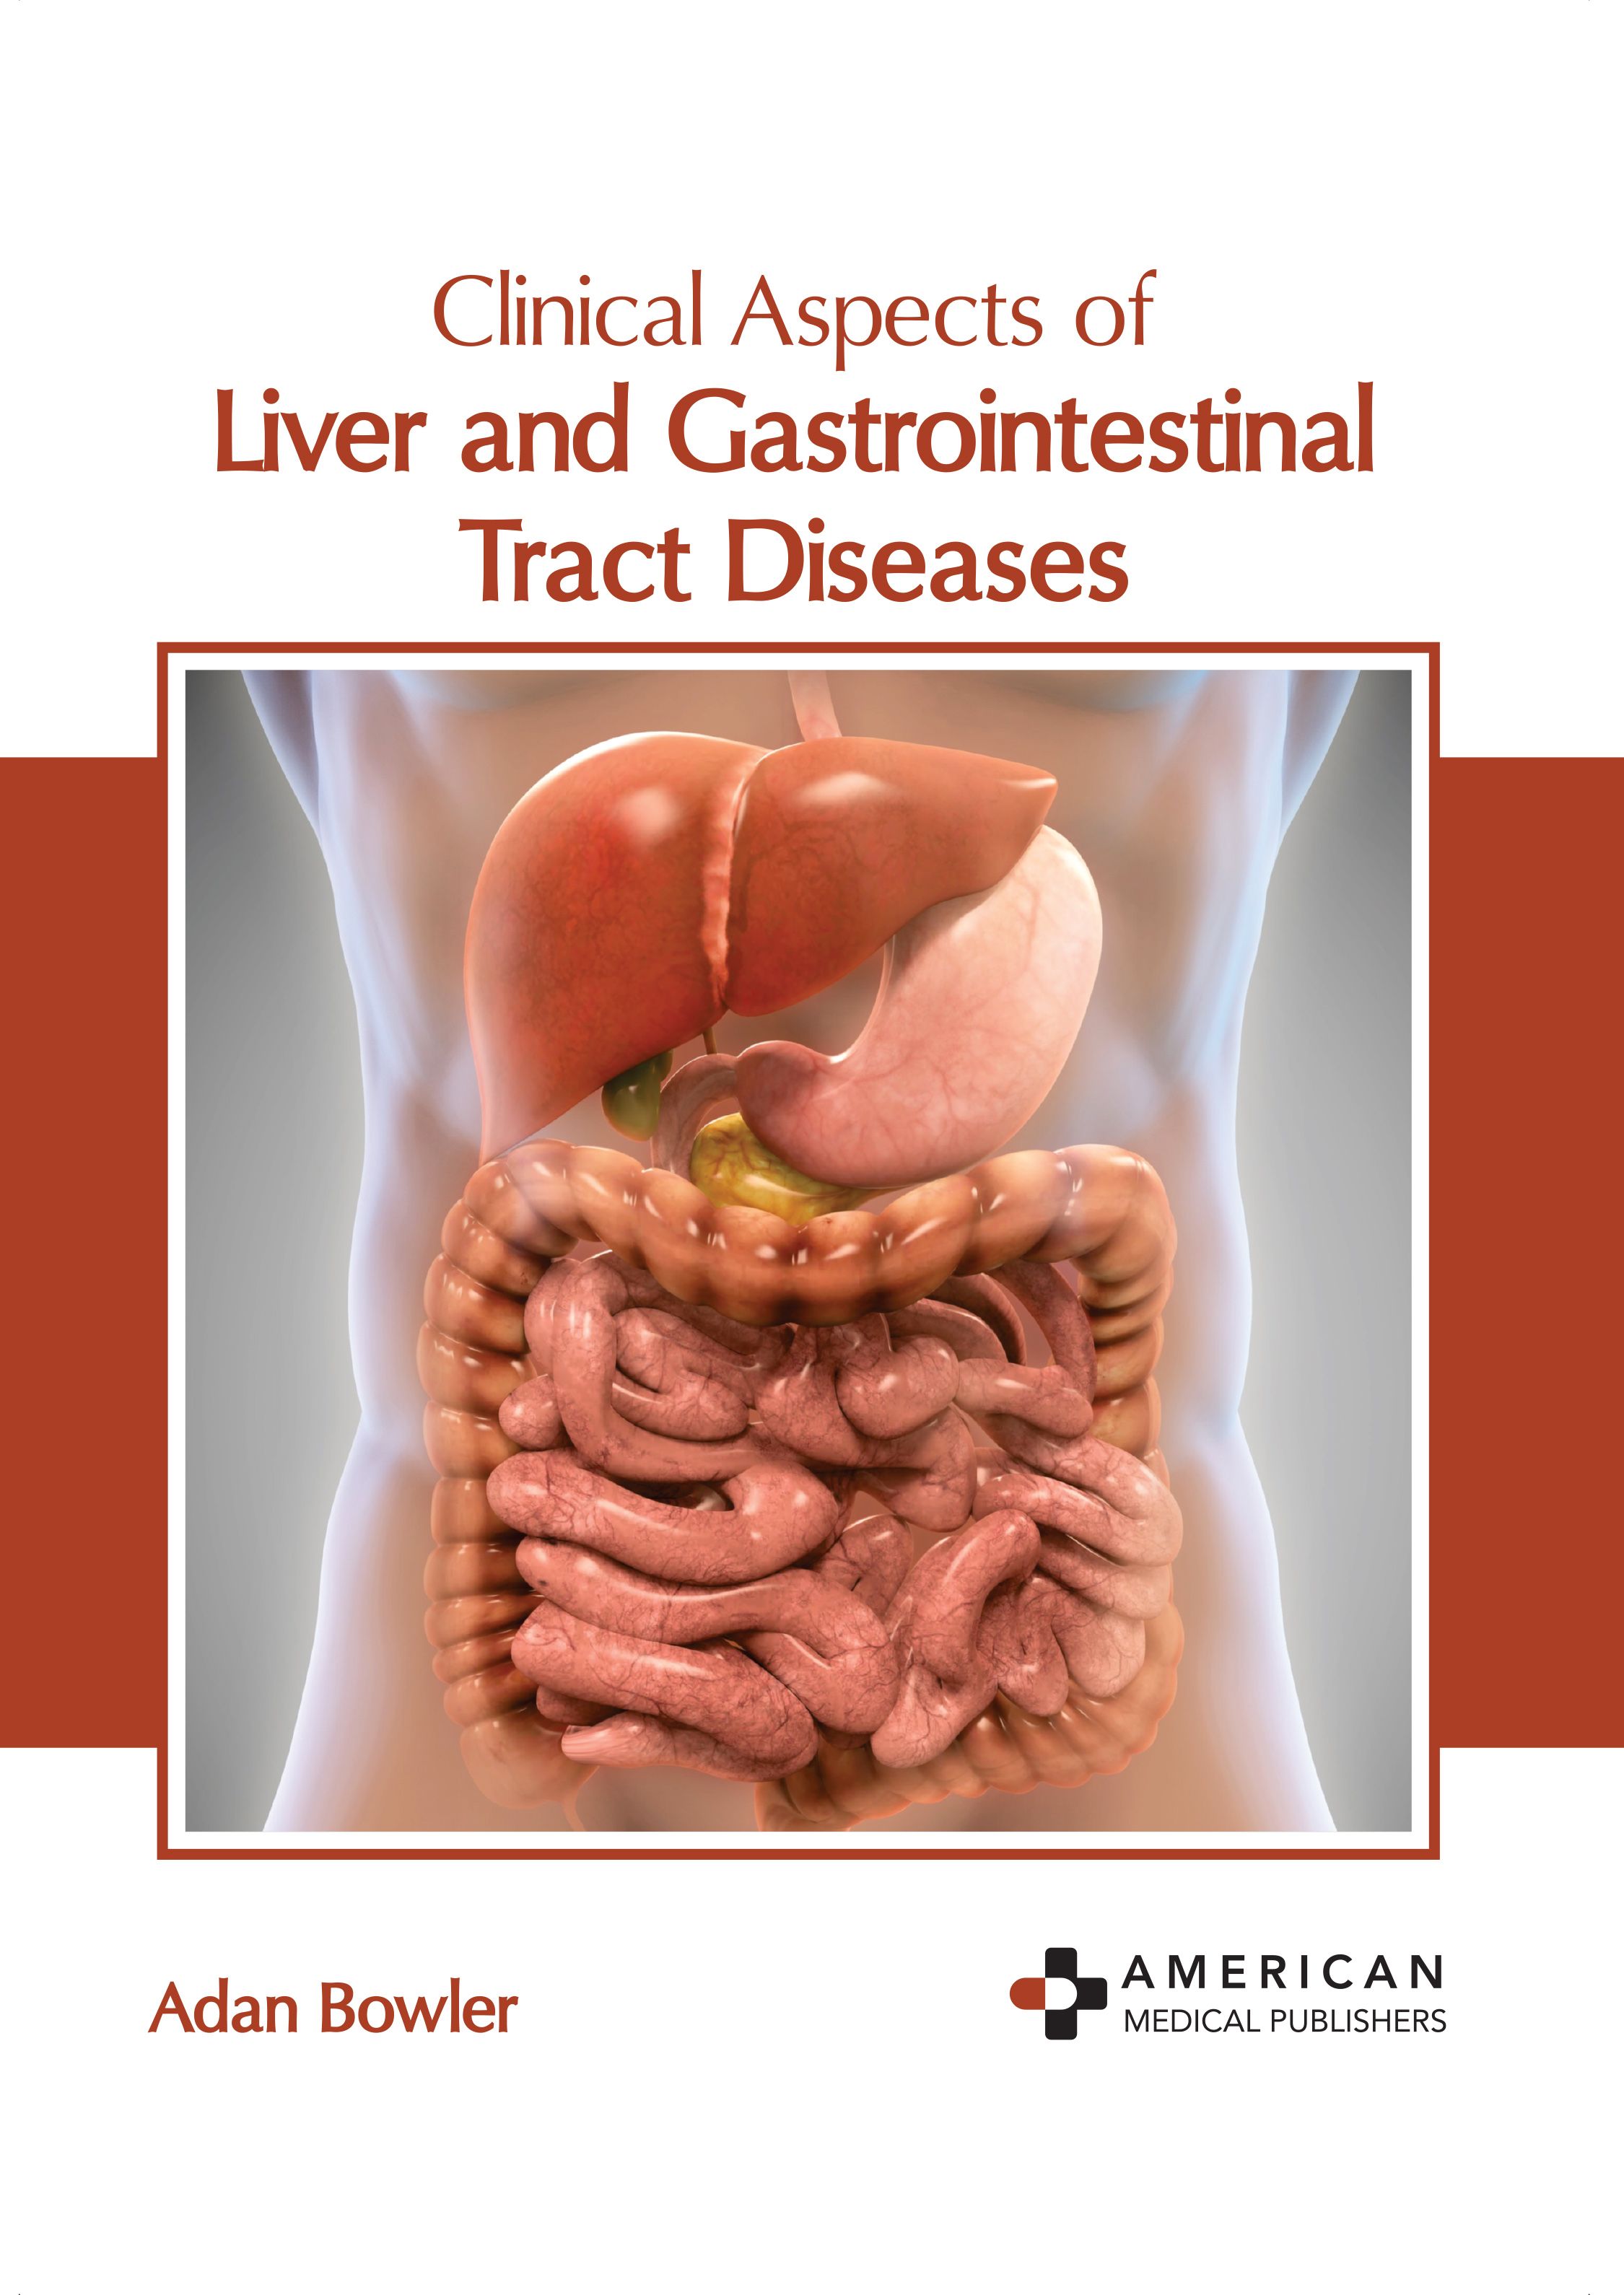 exclusive-publishers/american-medical-publishers/clinical-aspects-of-liver-and-gastrointestinal-tract-diseases-9781639279869